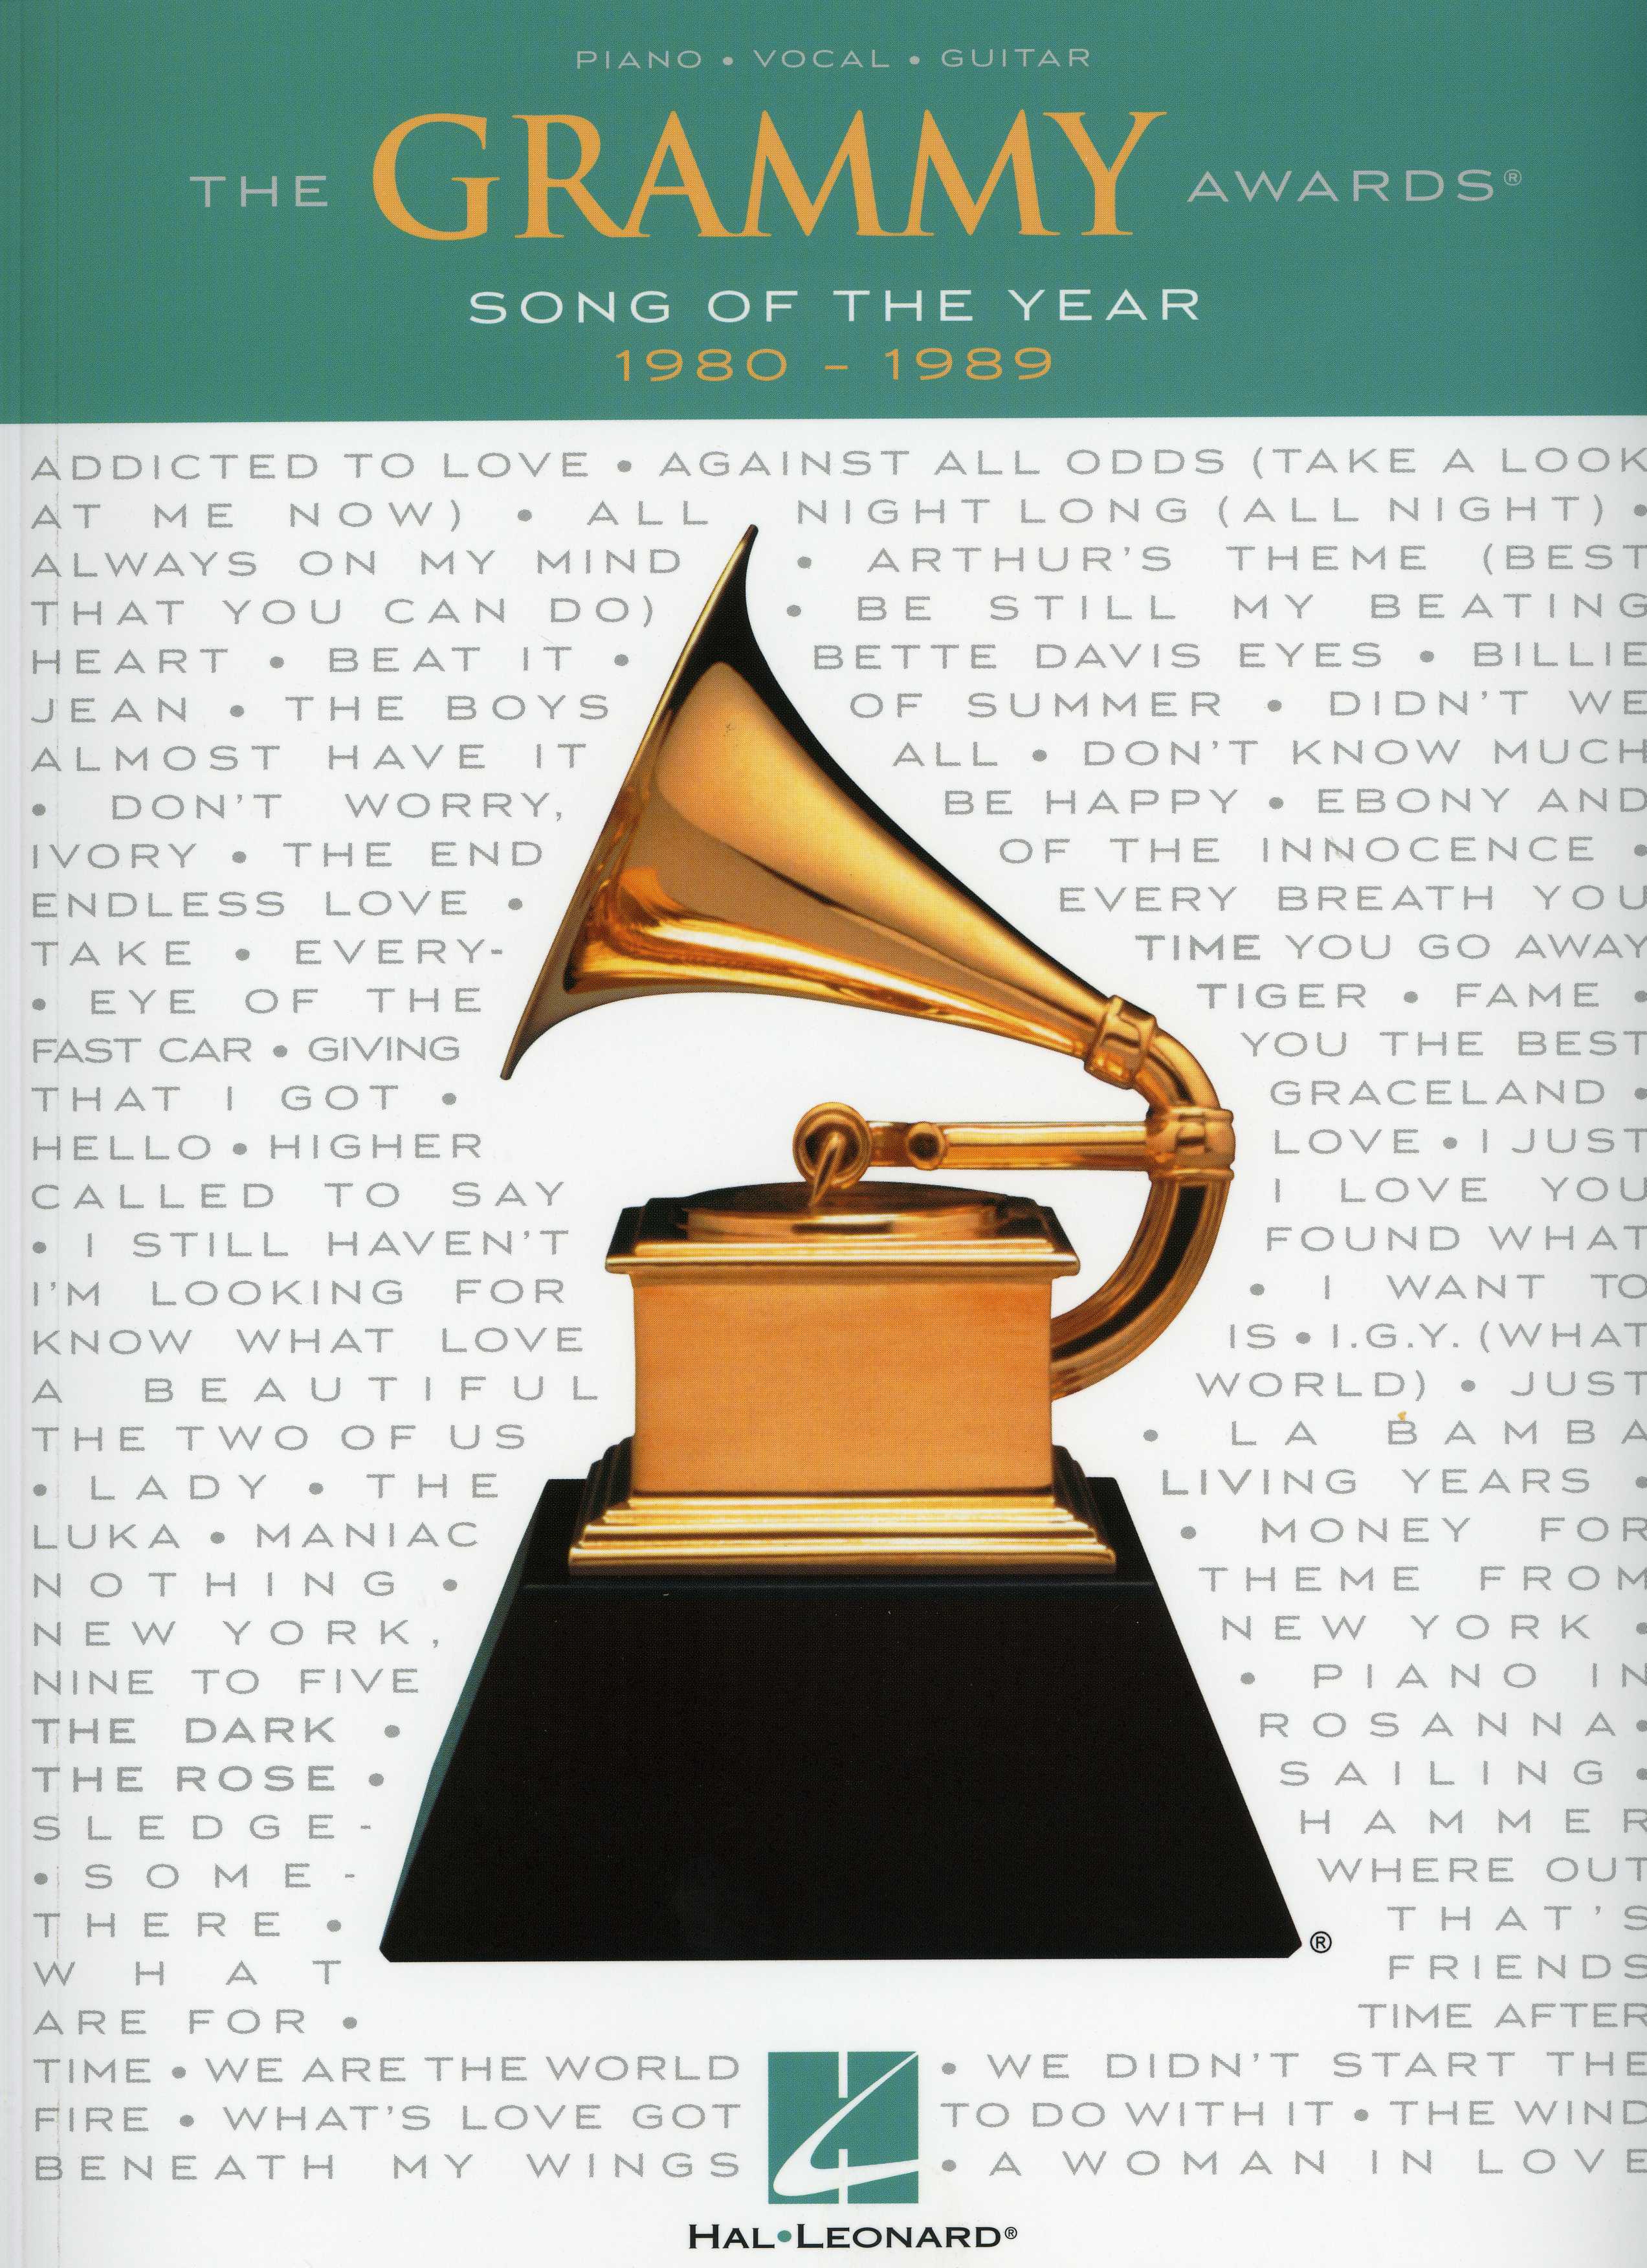 The Grammy Awards Song Of The Year 1980 - 1989